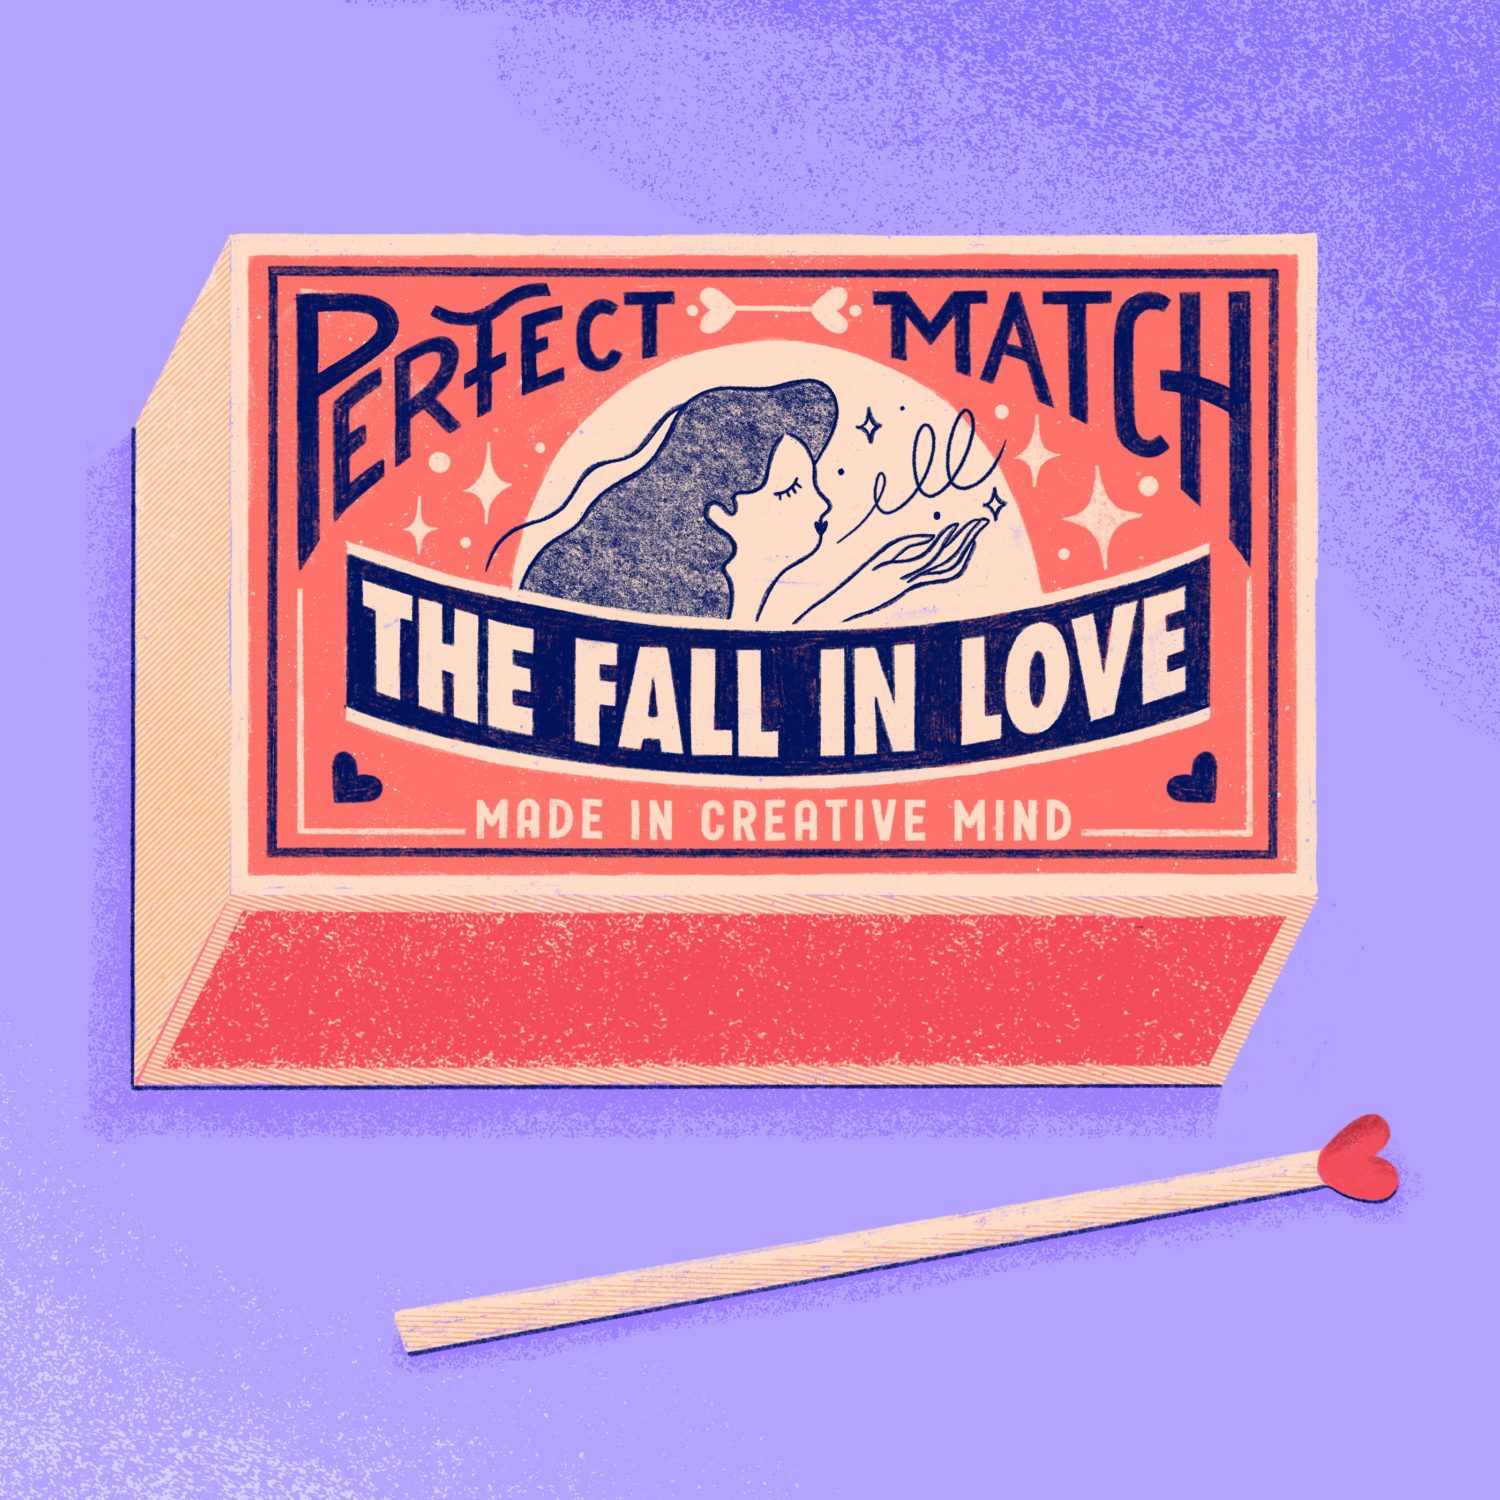 illustrations The perfect macth : the fall in love cleo studio